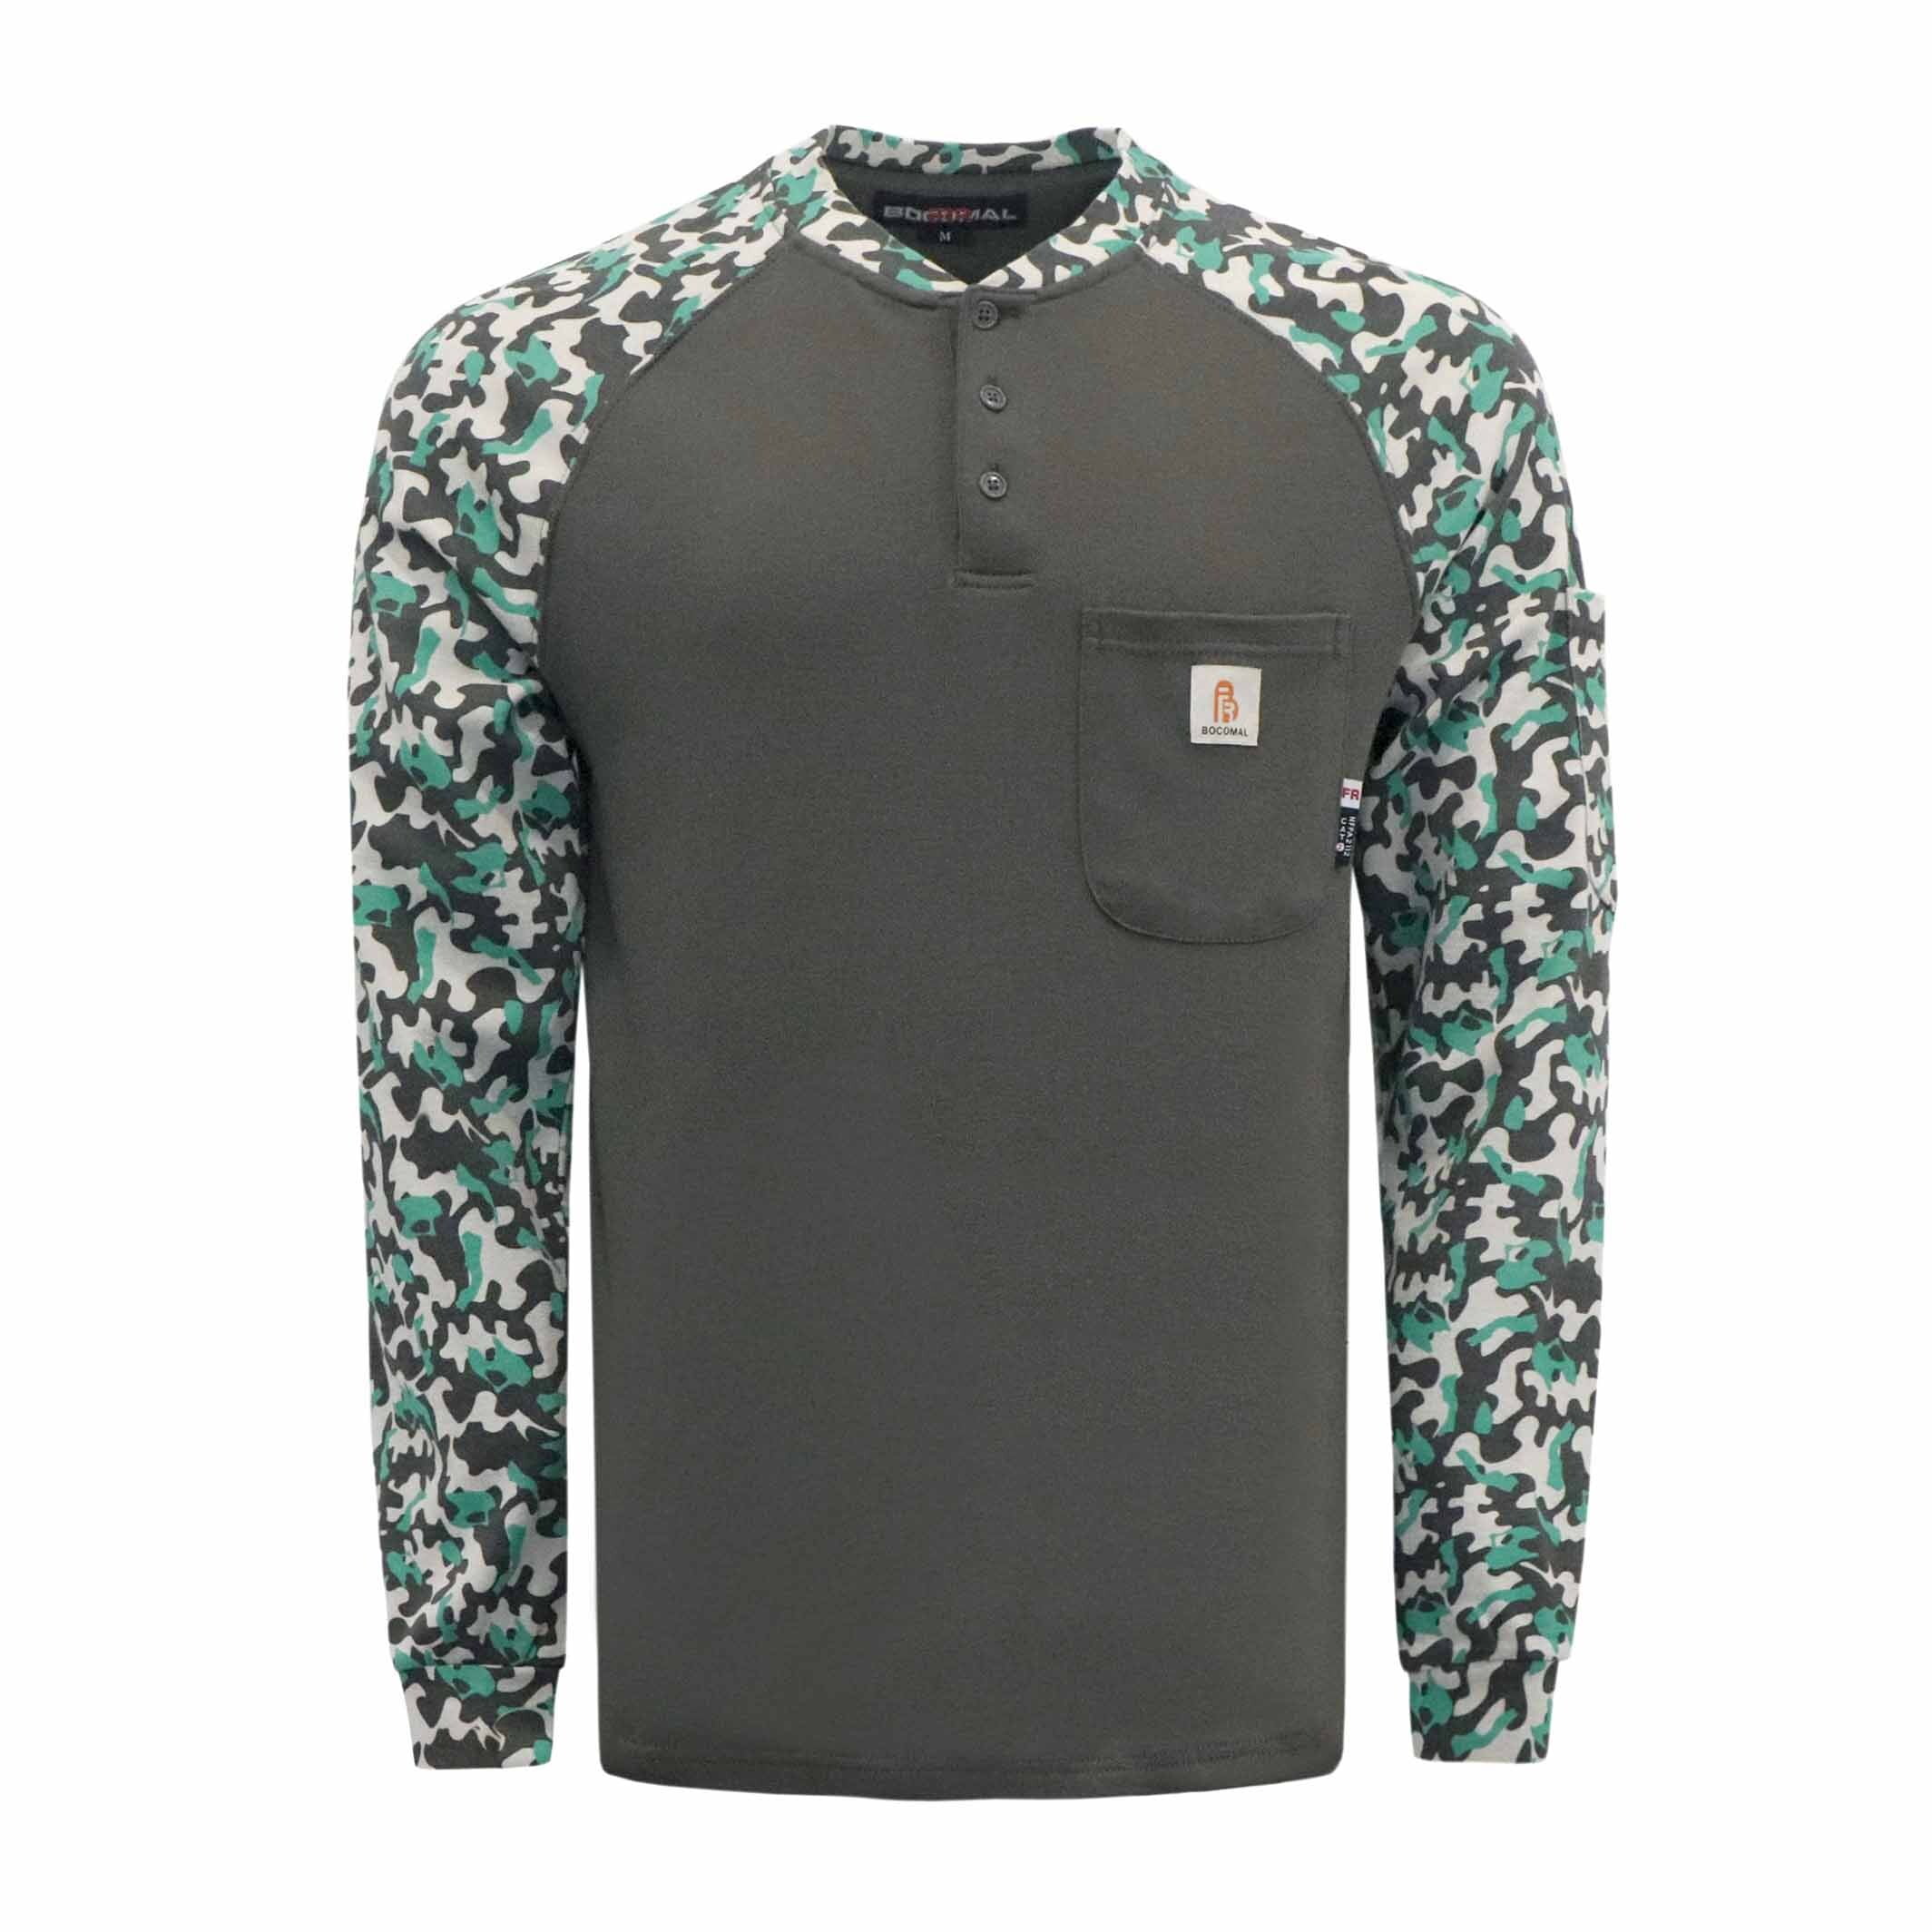 BOCOMAL FR Shirts Flame Resistant Henley Printed and Camo Two Tone 7oz ...